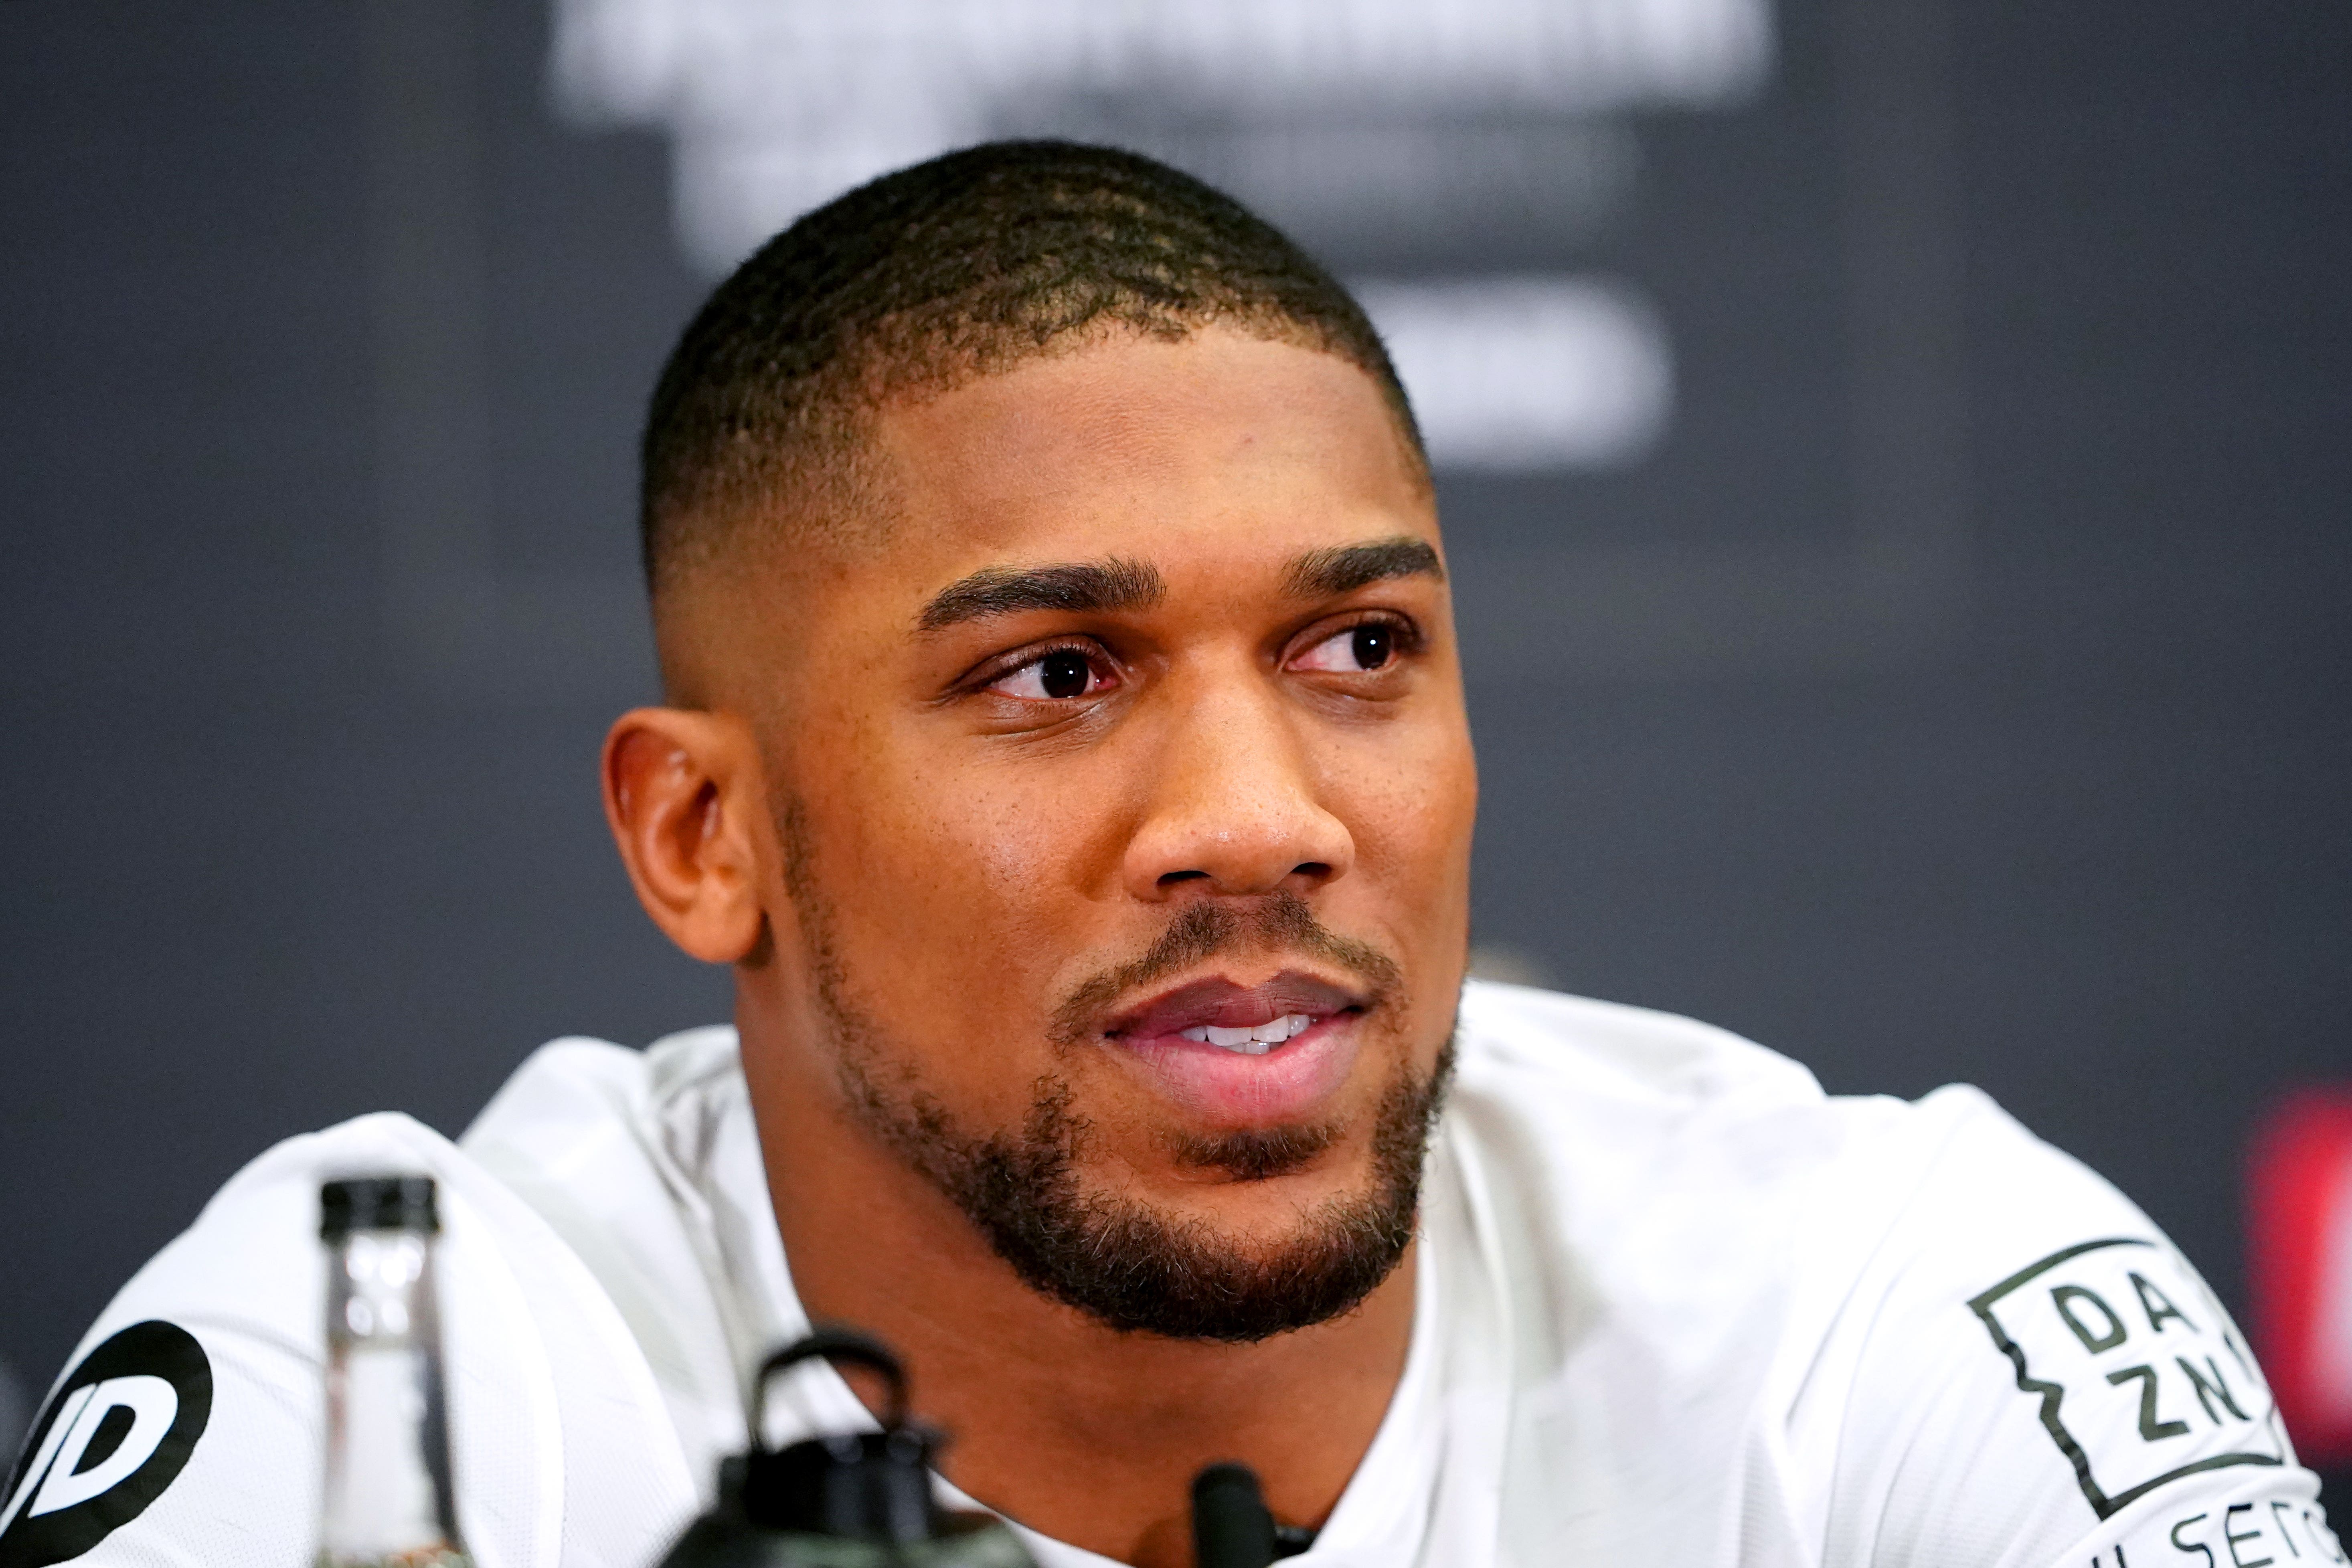 Anthony Joshua acknowledges he is approaching the last run of his professional career (Zac Goodwin/PA)